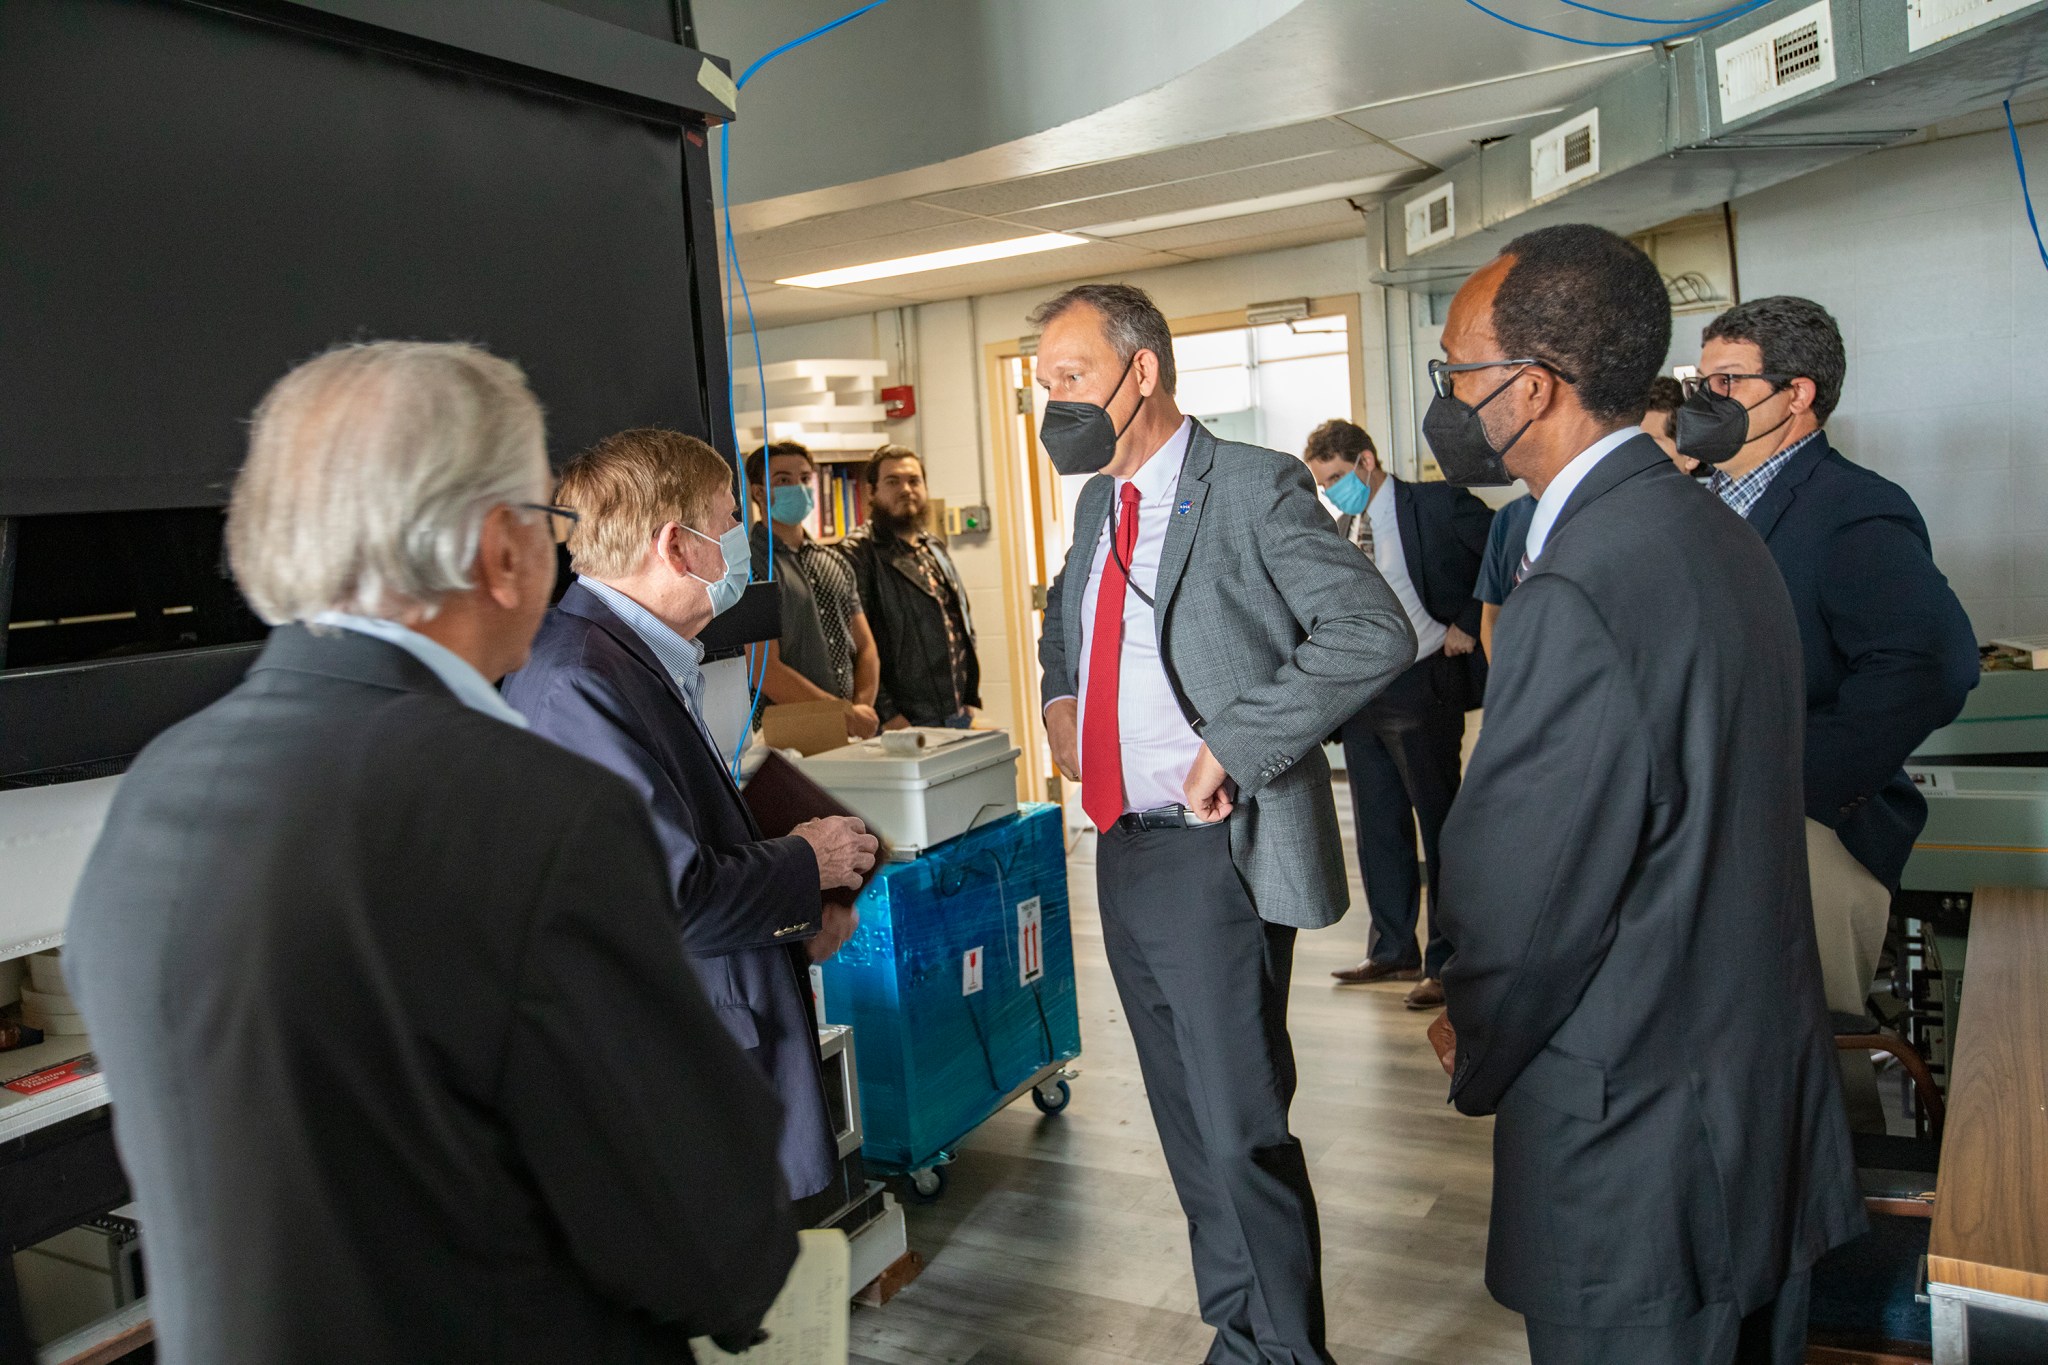 Dr. Zurbuchen and Langley Center Director Clayton Turner, picture here to the right of Dr. Zurbuchen, also visited with members of Hampton University's Center for Atmospheric Sciences.